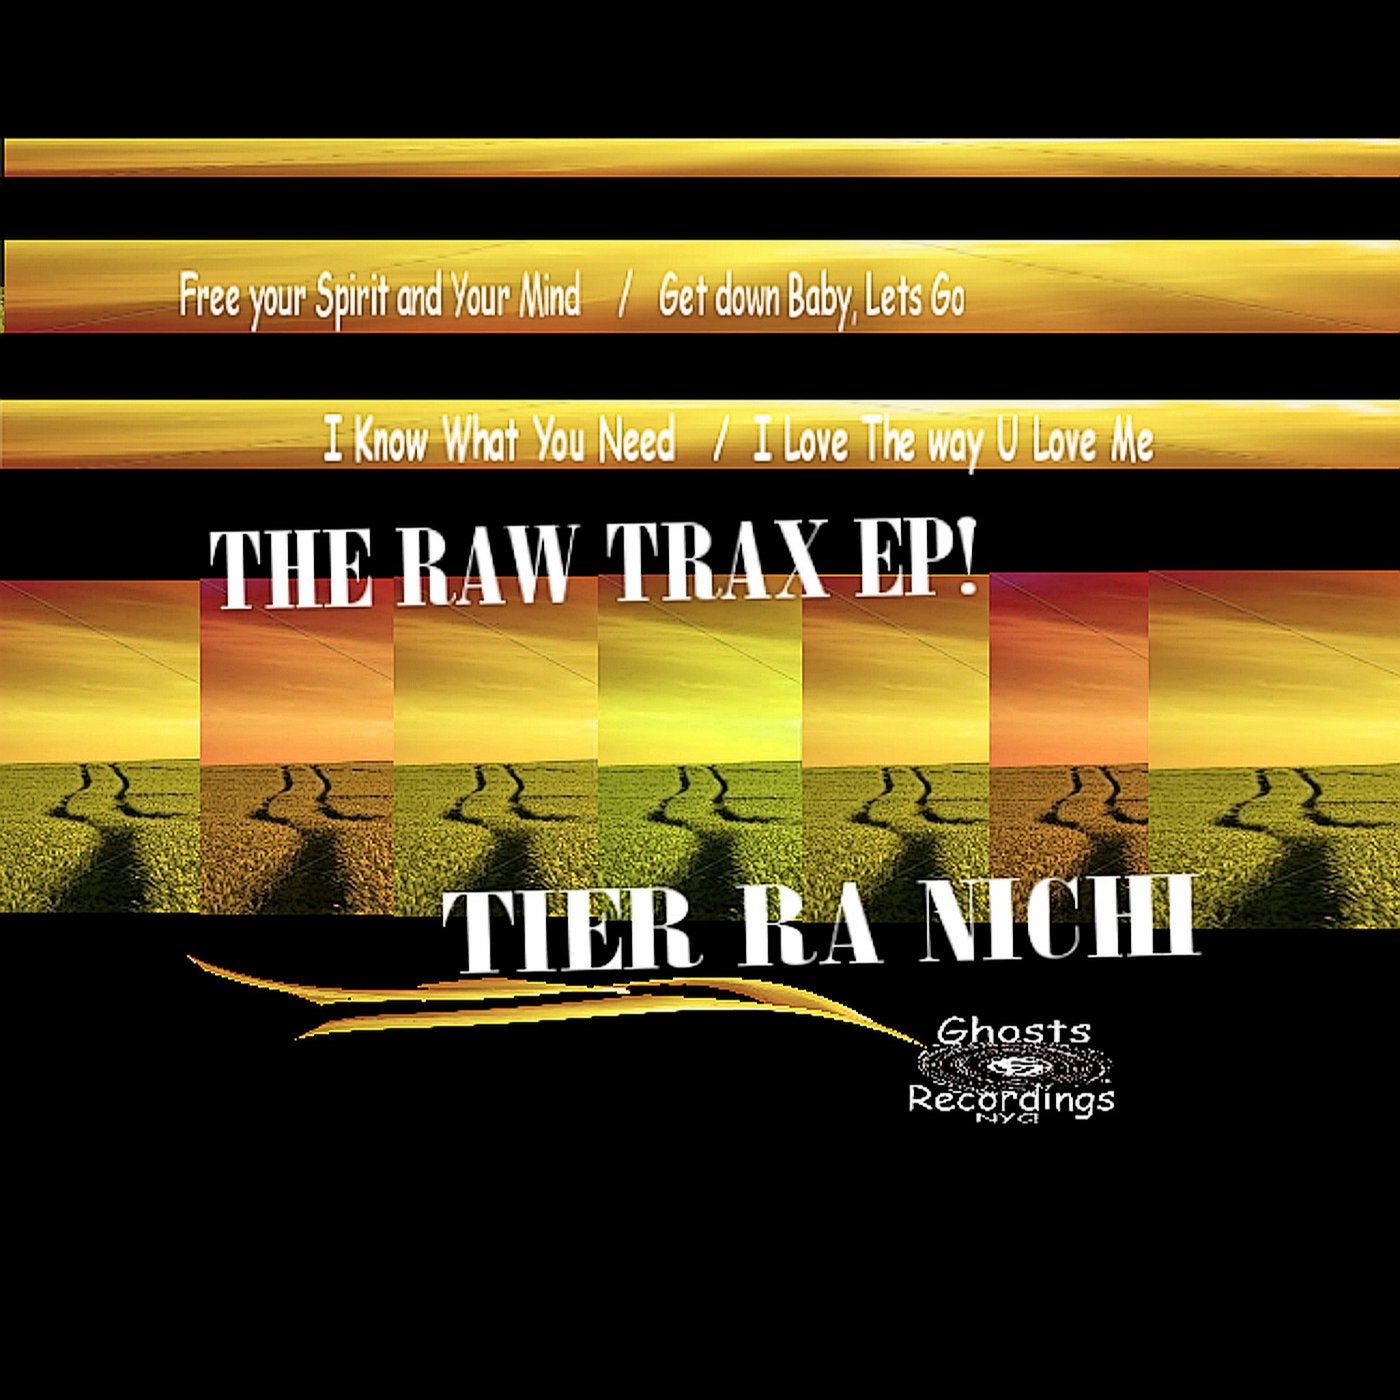 The Raw Trax EP!